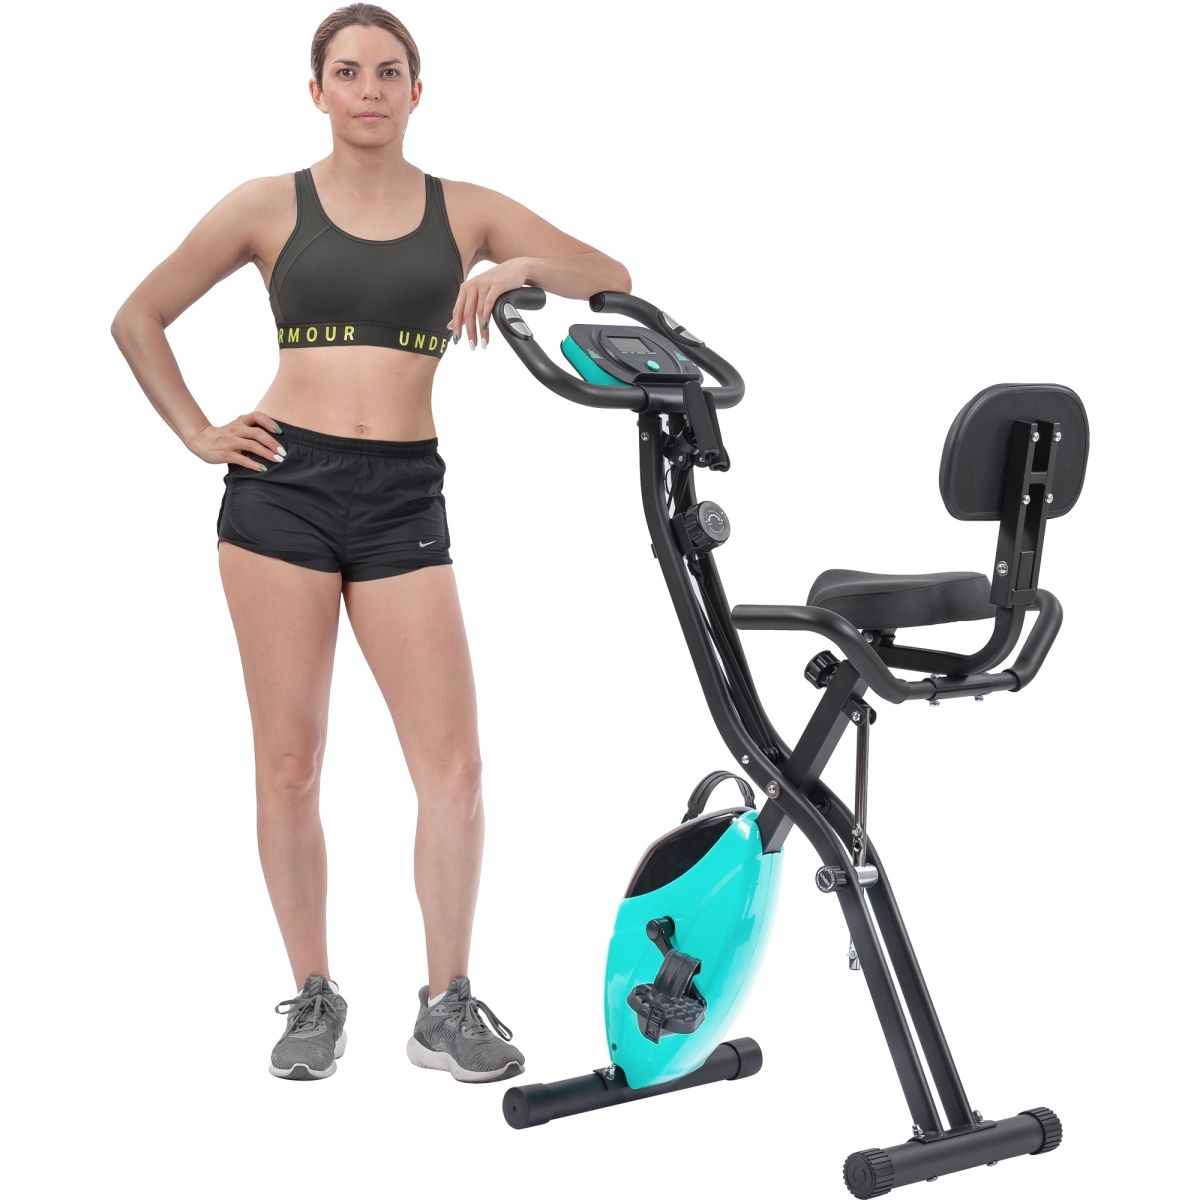 Folding Exercise Bike, Fitness Upright And Recumbent X-Bike With 10-Level Adjustable Resistance - Green